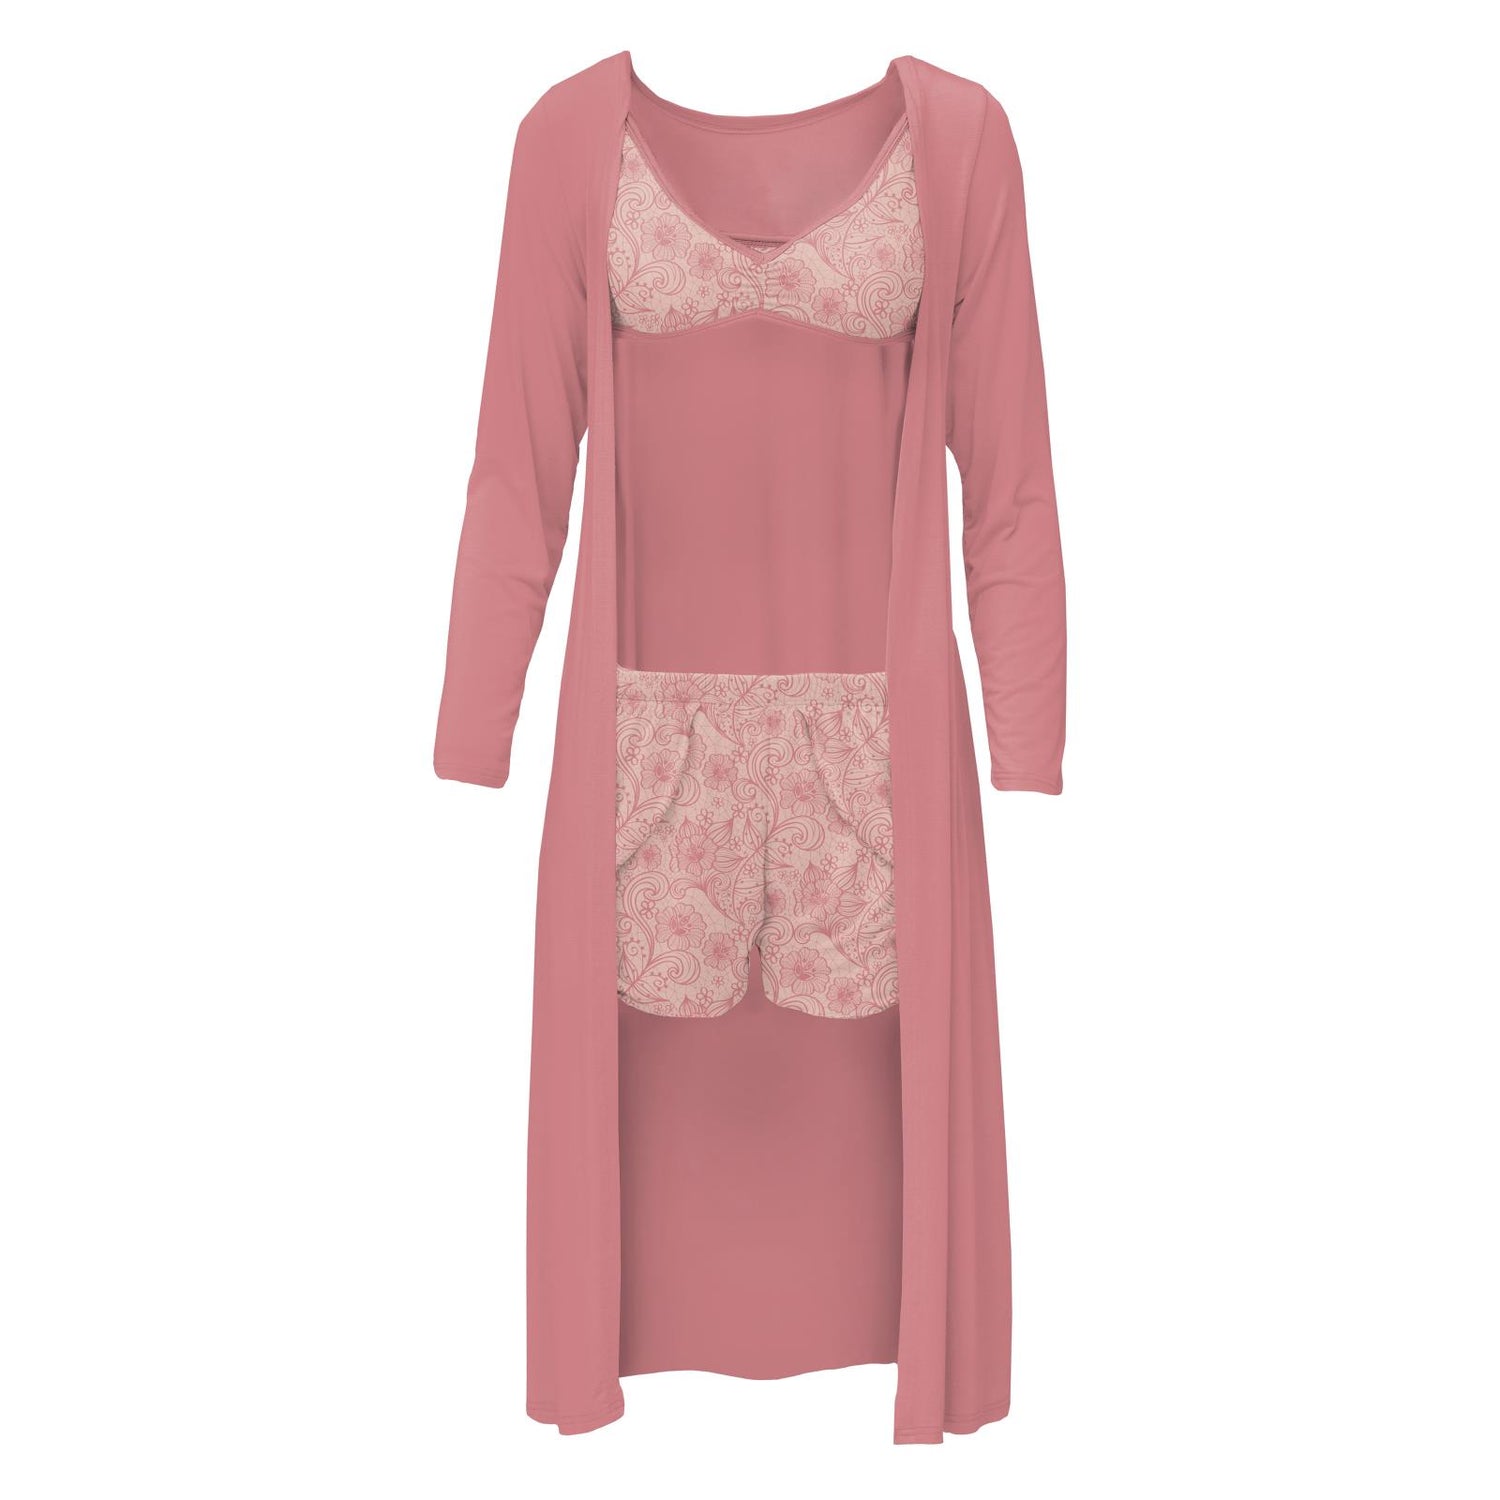 Women's Print Sleeping Bra, Tulip Shorts and Duster Robe Set in Peach Blossom Lace